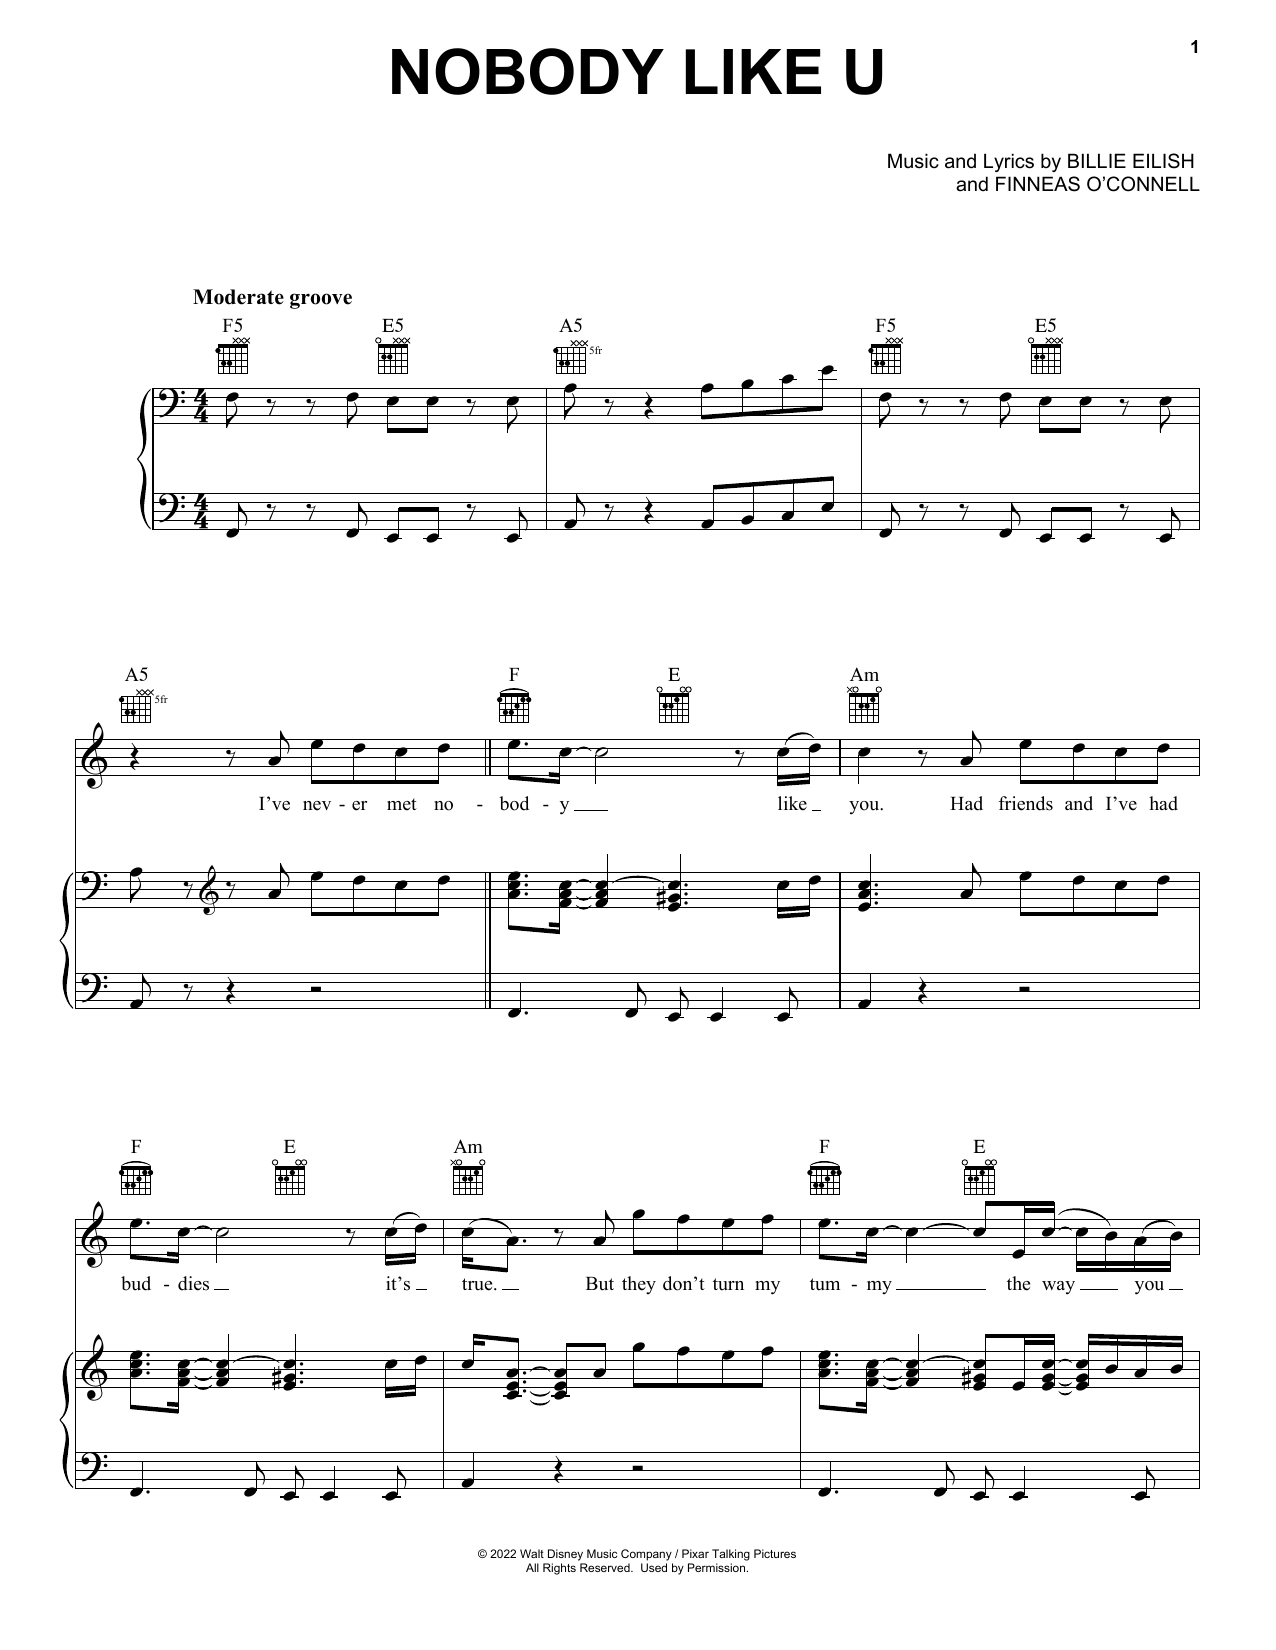 4*TOWN Nobody Like U (from Turning Red) sheet music notes and chords. Download Printable PDF.